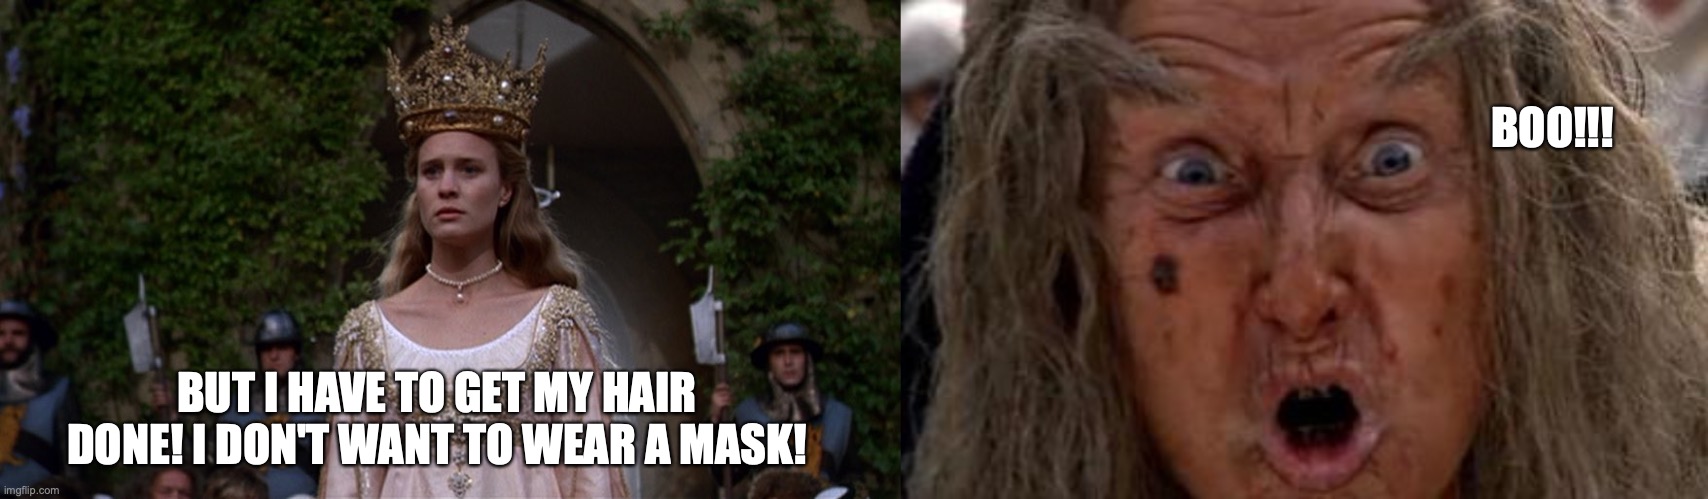 Boo! Plague Spreaders | BOO!!! BUT I HAVE TO GET MY HAIR DONE! I DON'T WANT TO WEAR A MASK! | image tagged in princess bride,mask,face mask,covid-19,spoiled | made w/ Imgflip meme maker